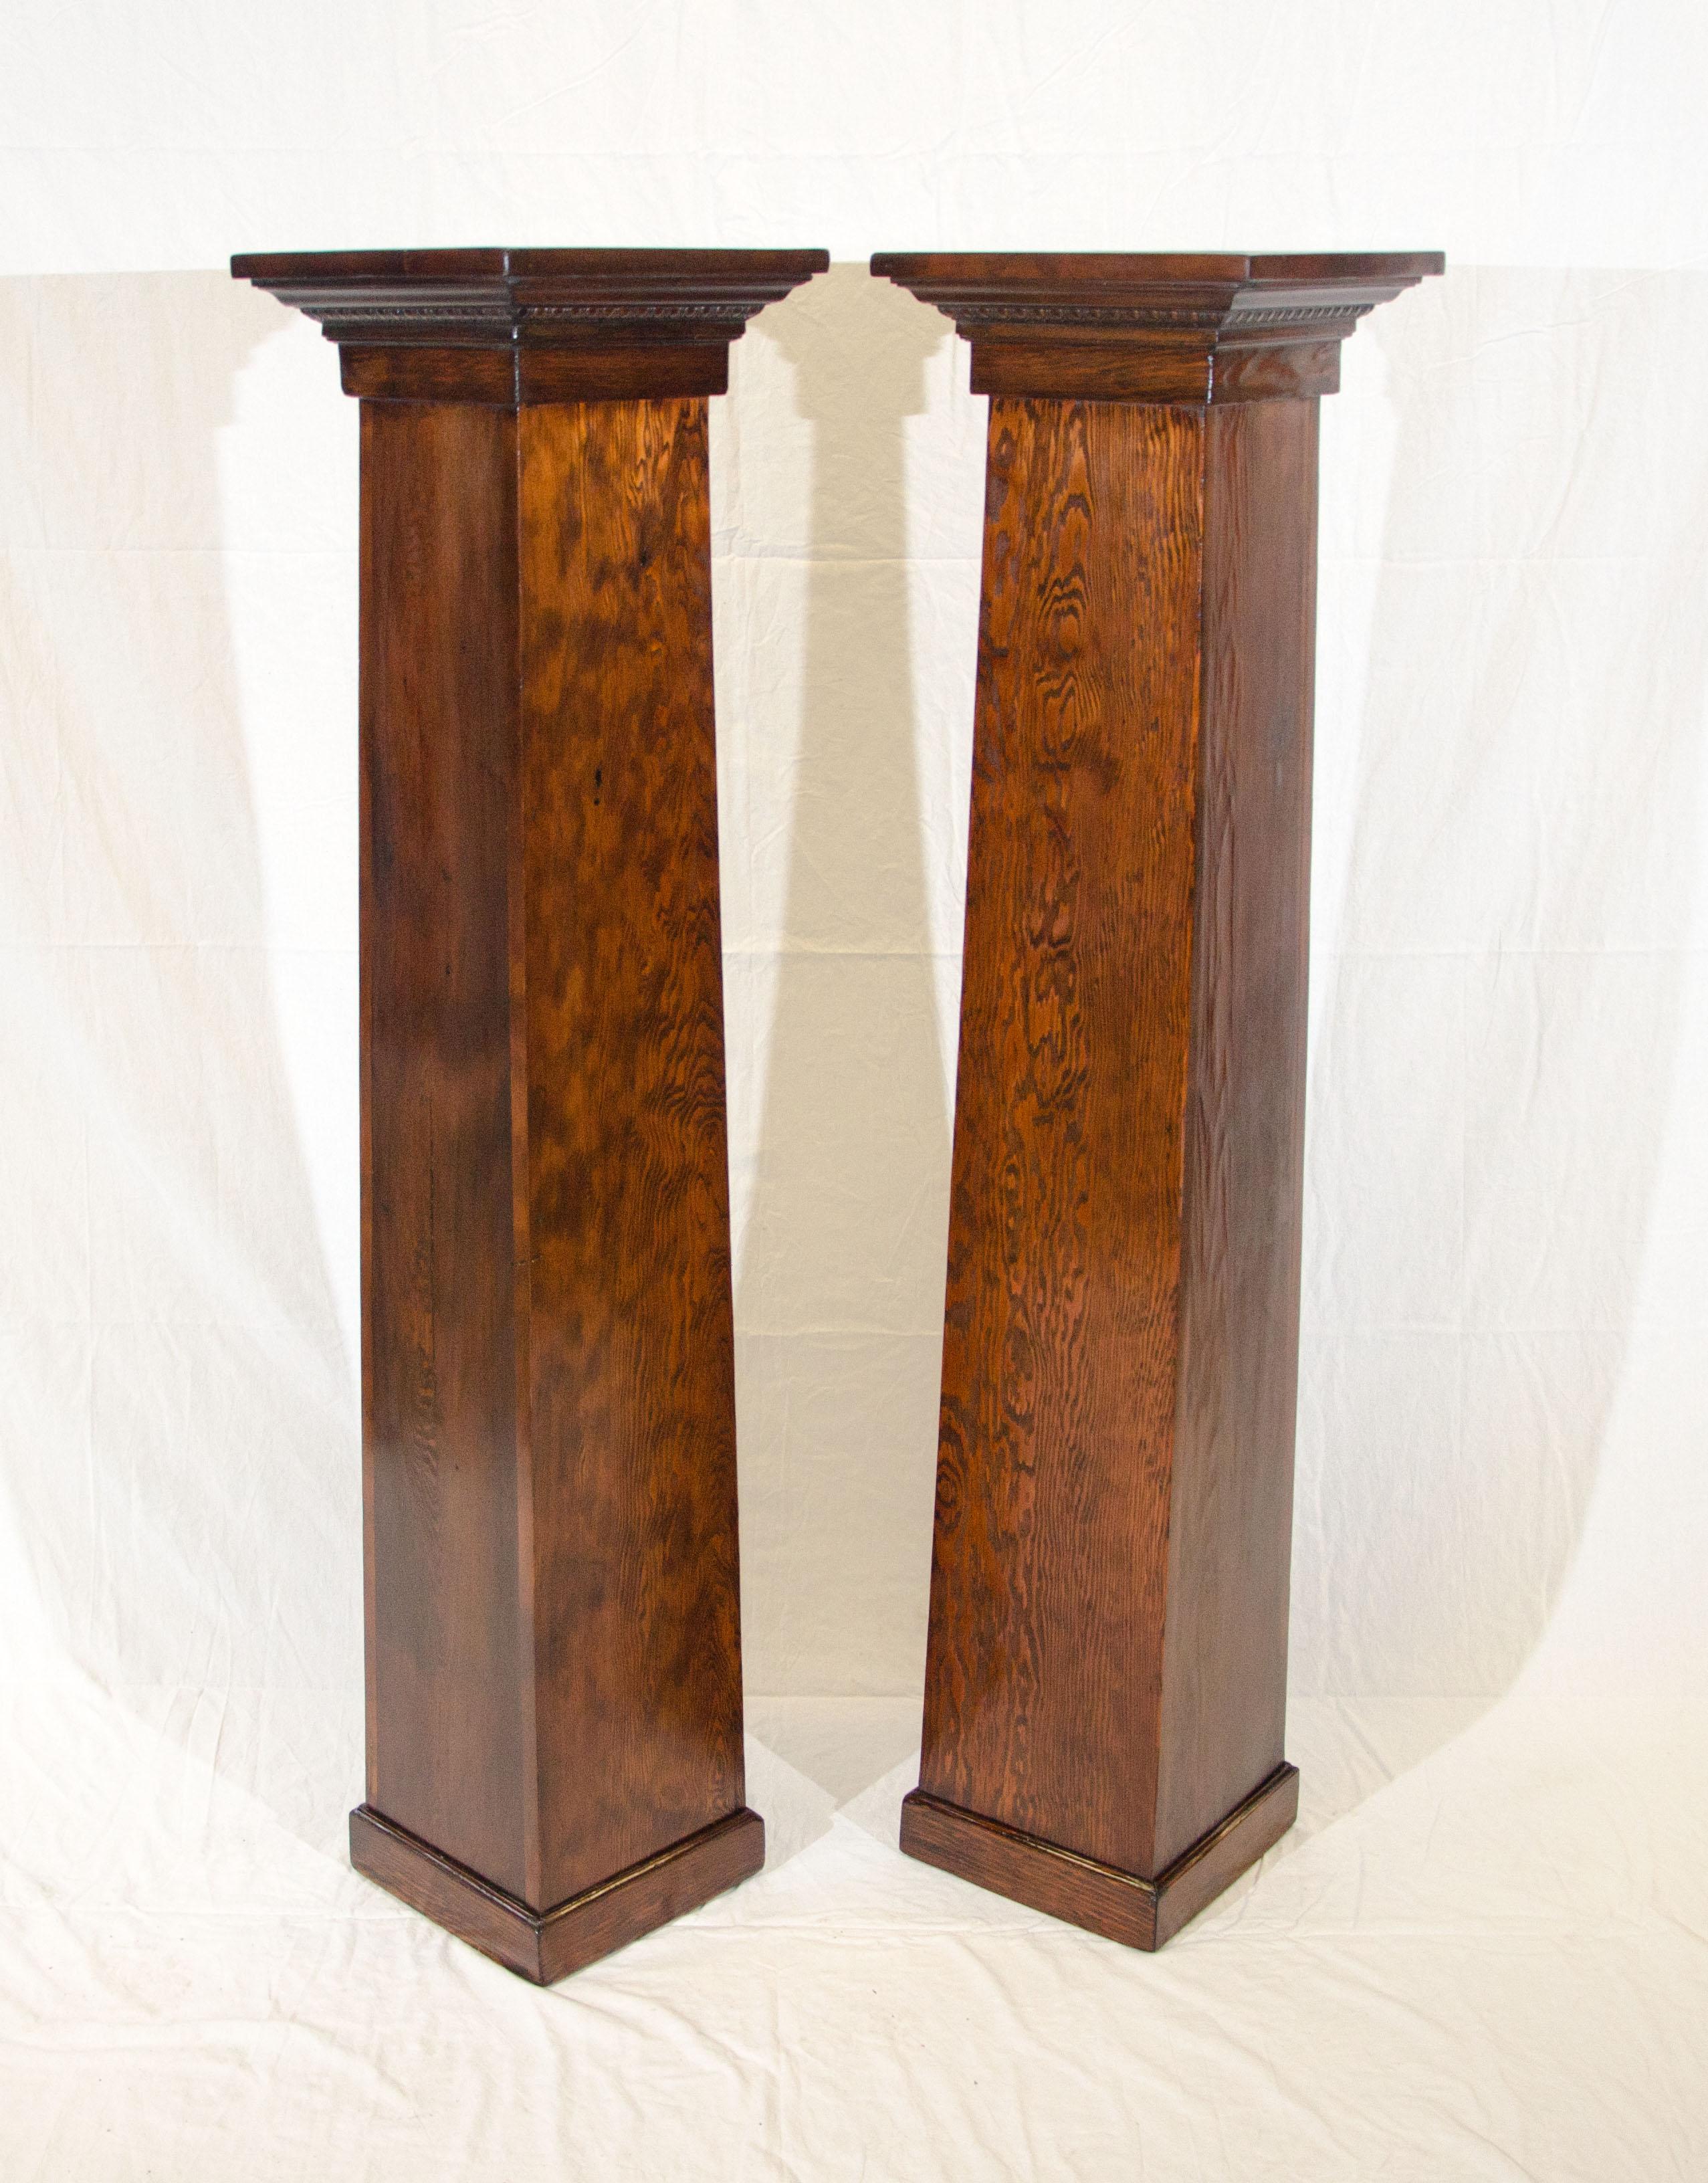 20th Century Pair of Fir Arts & Crafts Architectural Columns or Plant Stands